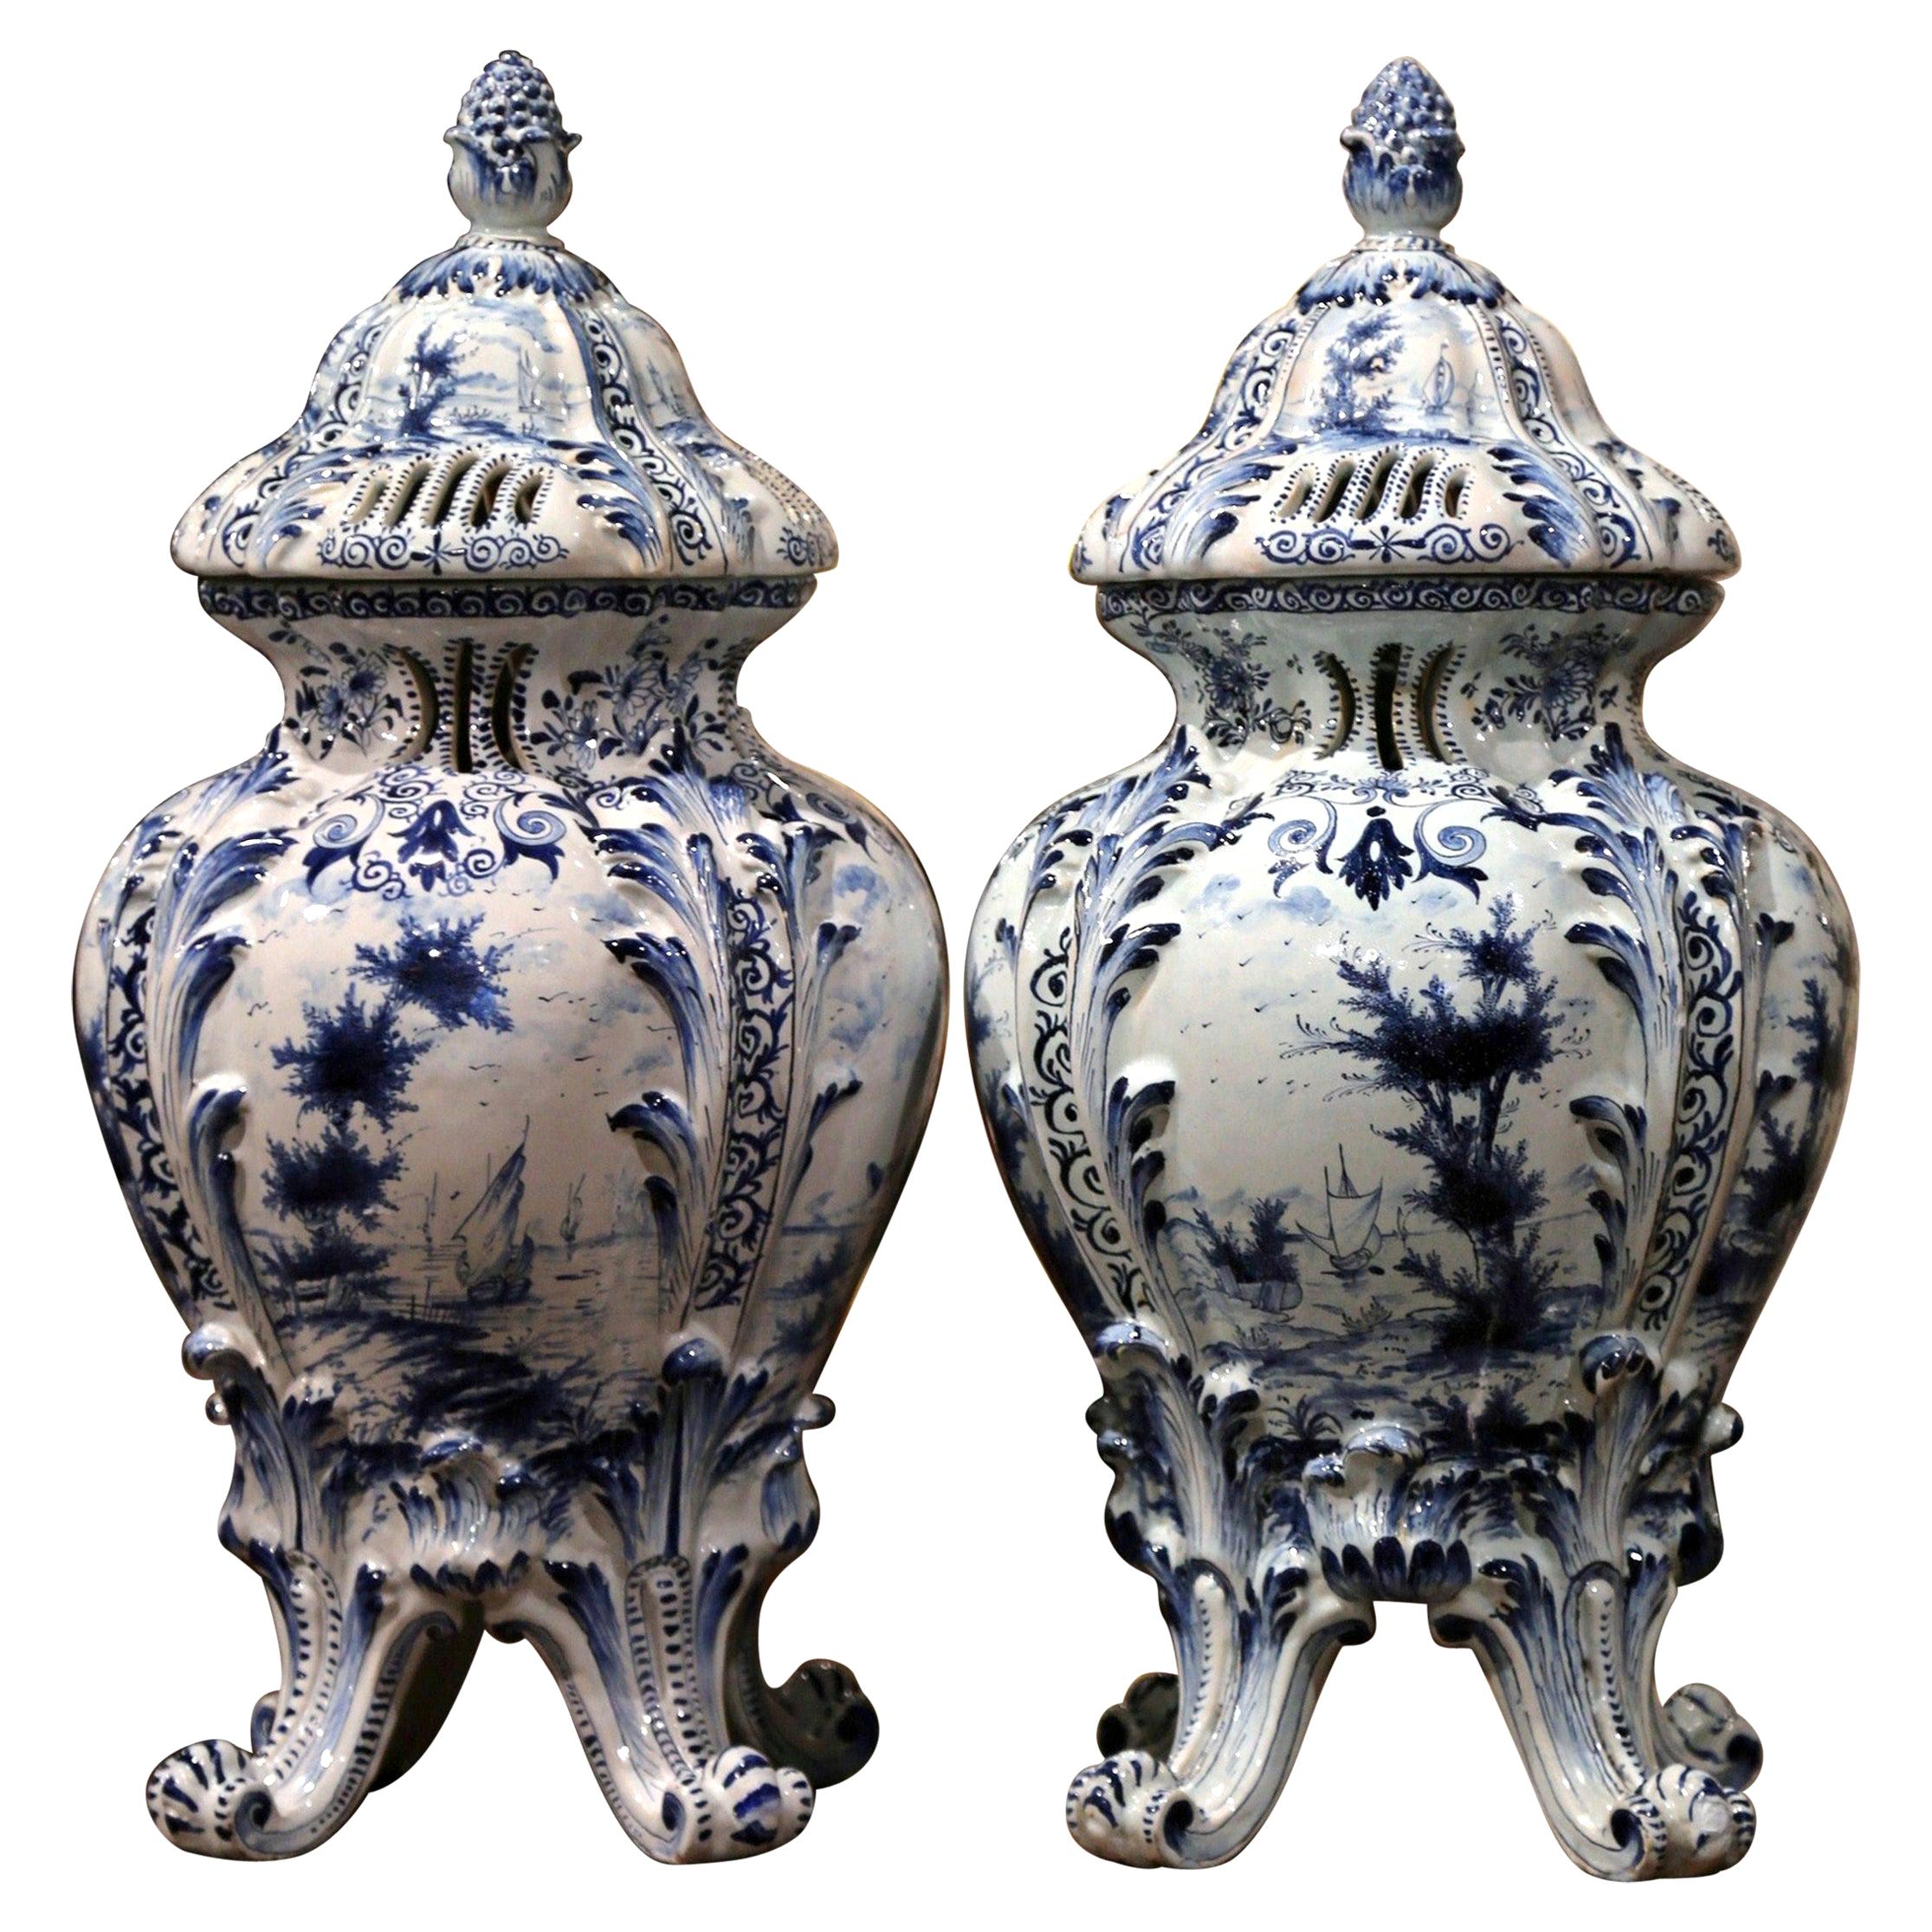 Pair of 18th Century French Blue and White Hand Painted Faience Delft Tureens